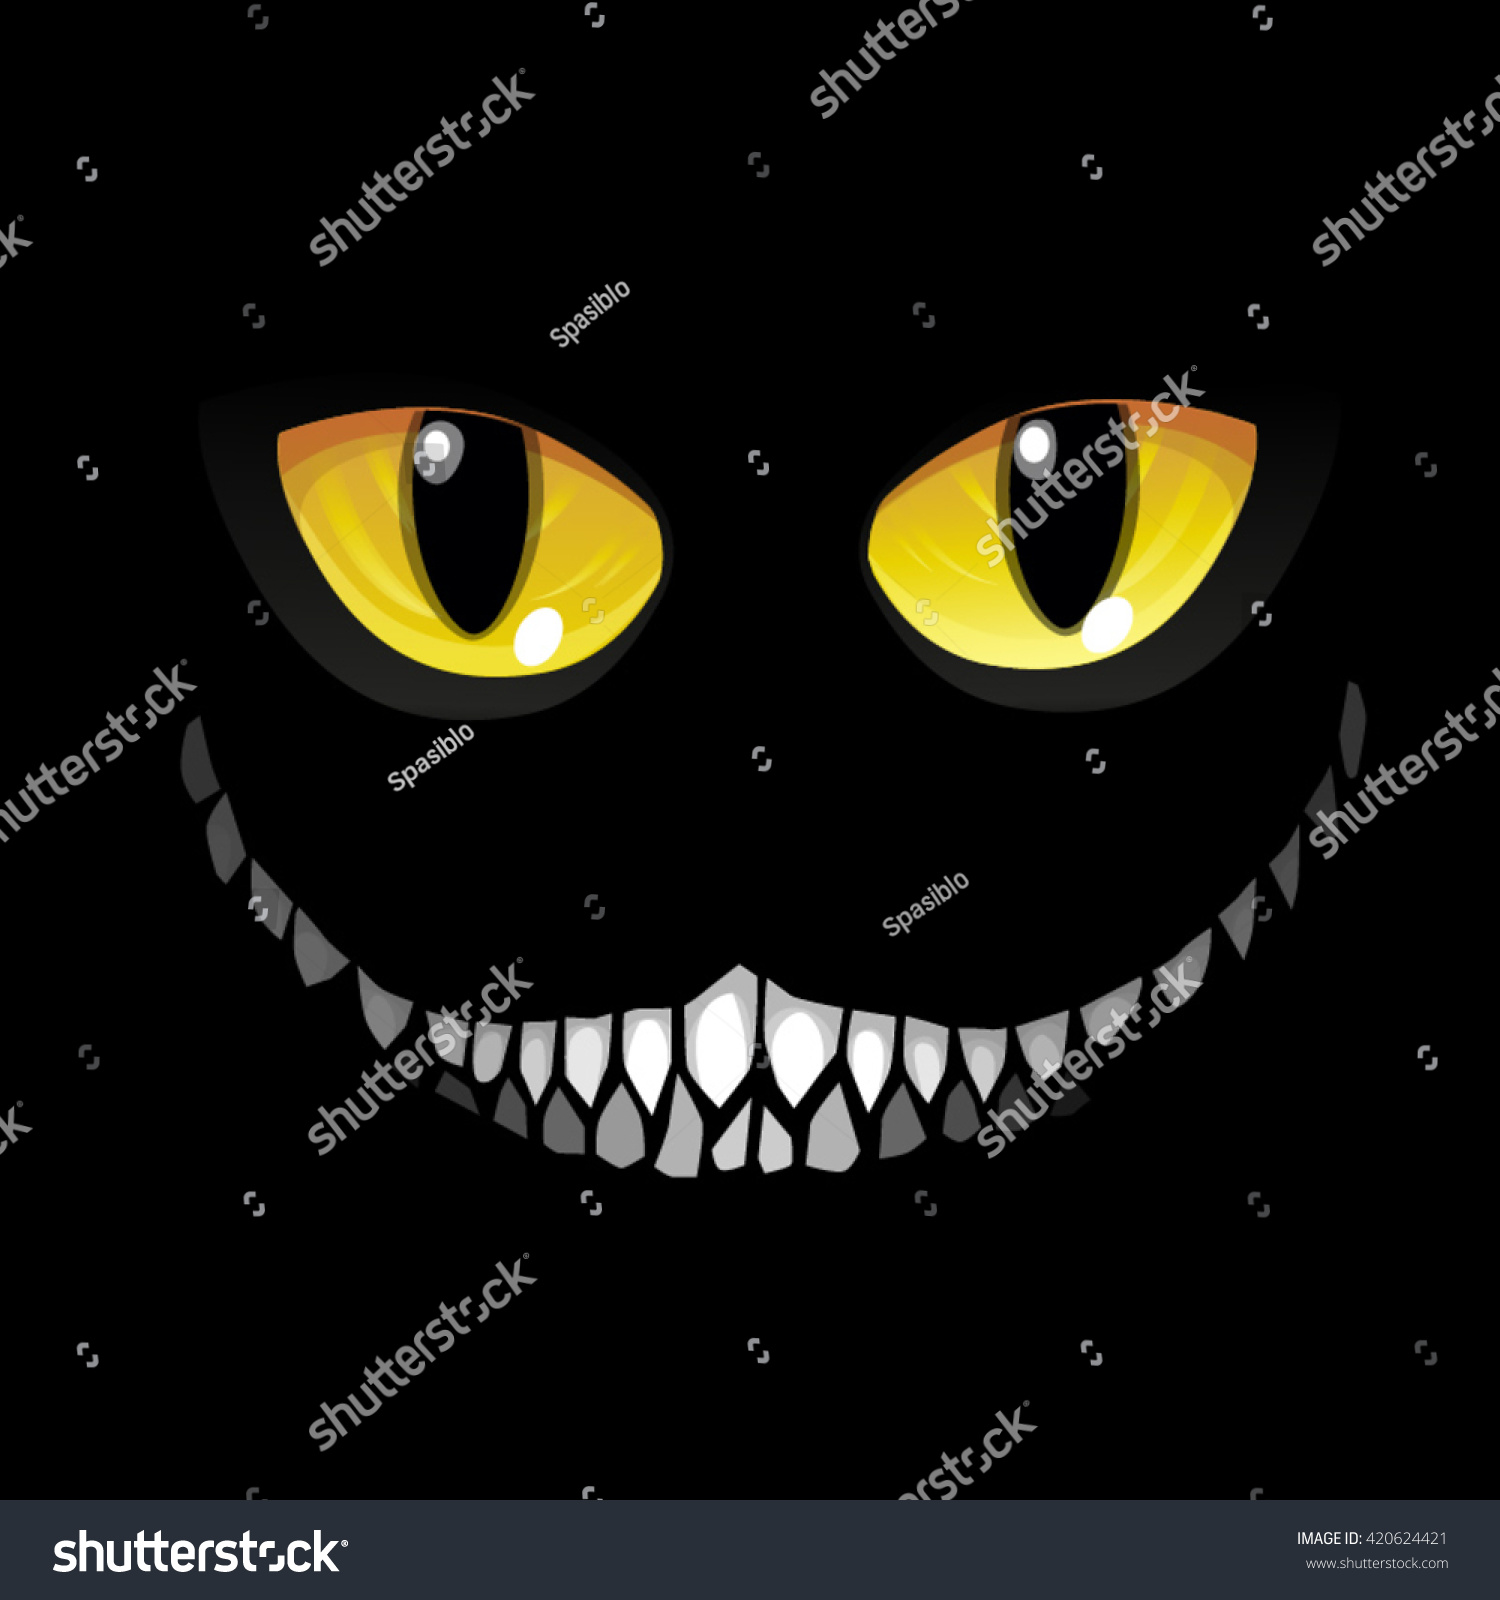 SVG of Black cat in darkness. Glowing eyes and a sinister smile. Vector illustration. svg